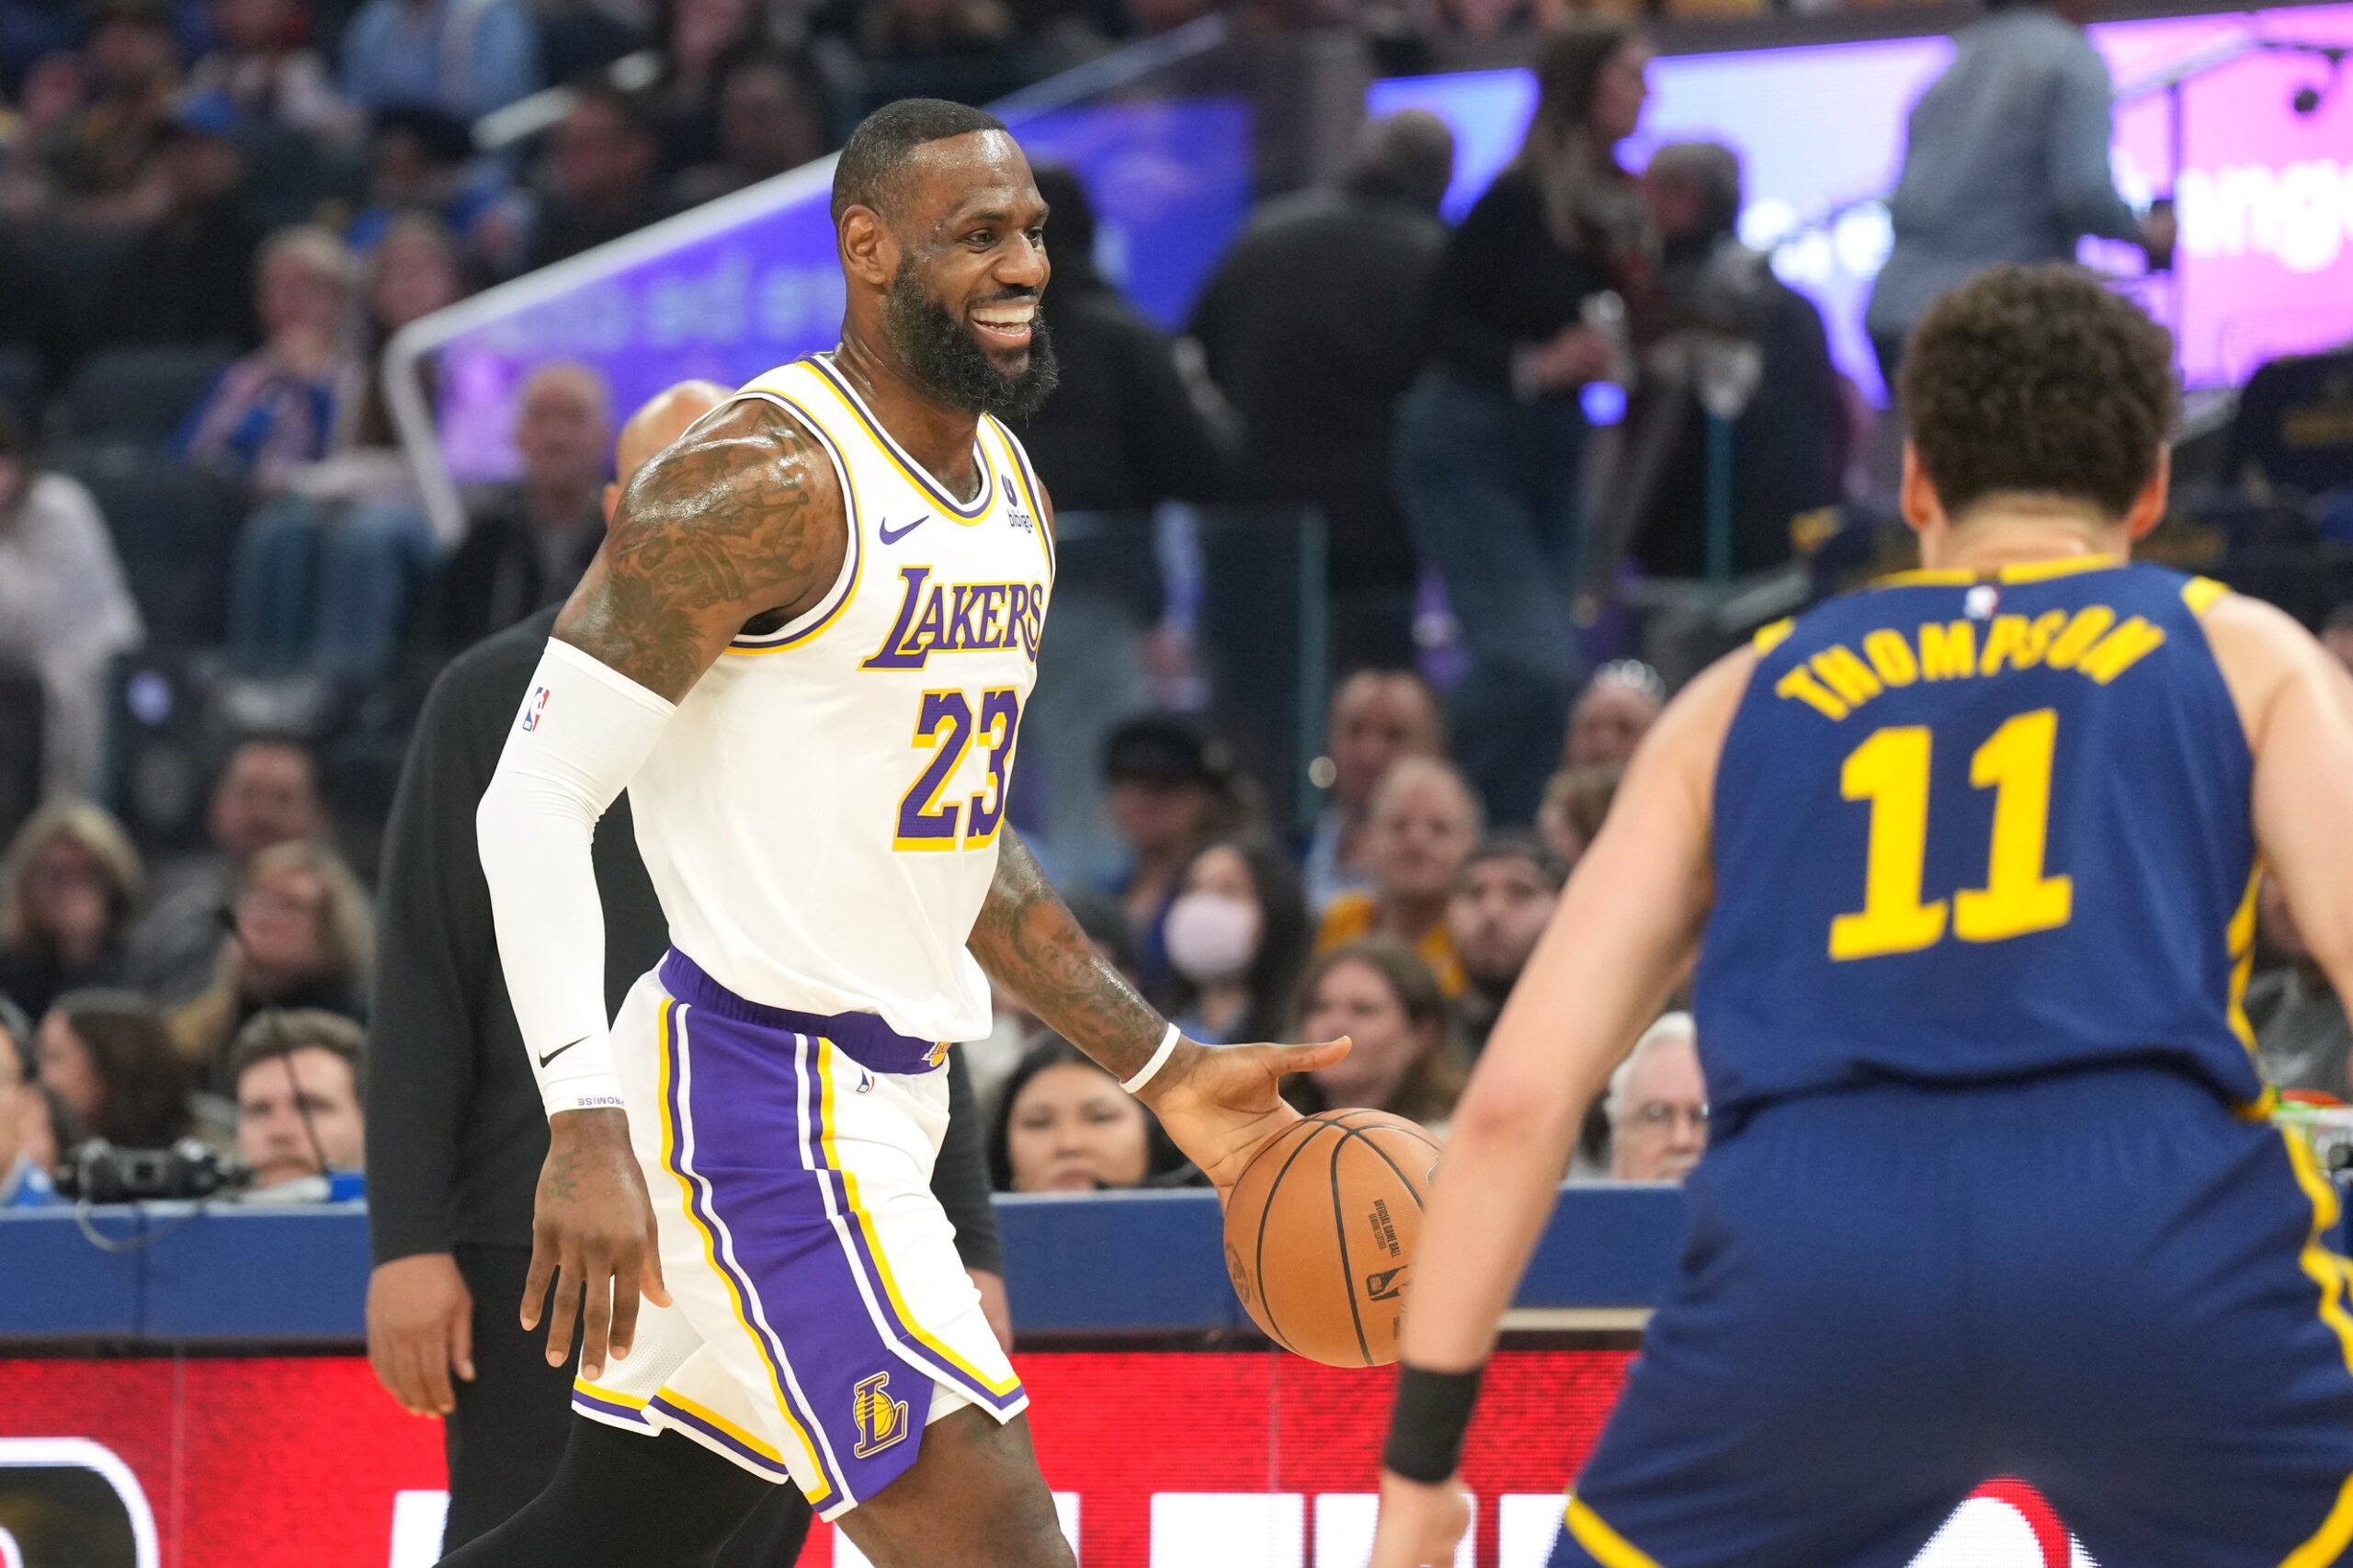 Los Angeles Lakers forward LeBron James guarded by Klay Thompson